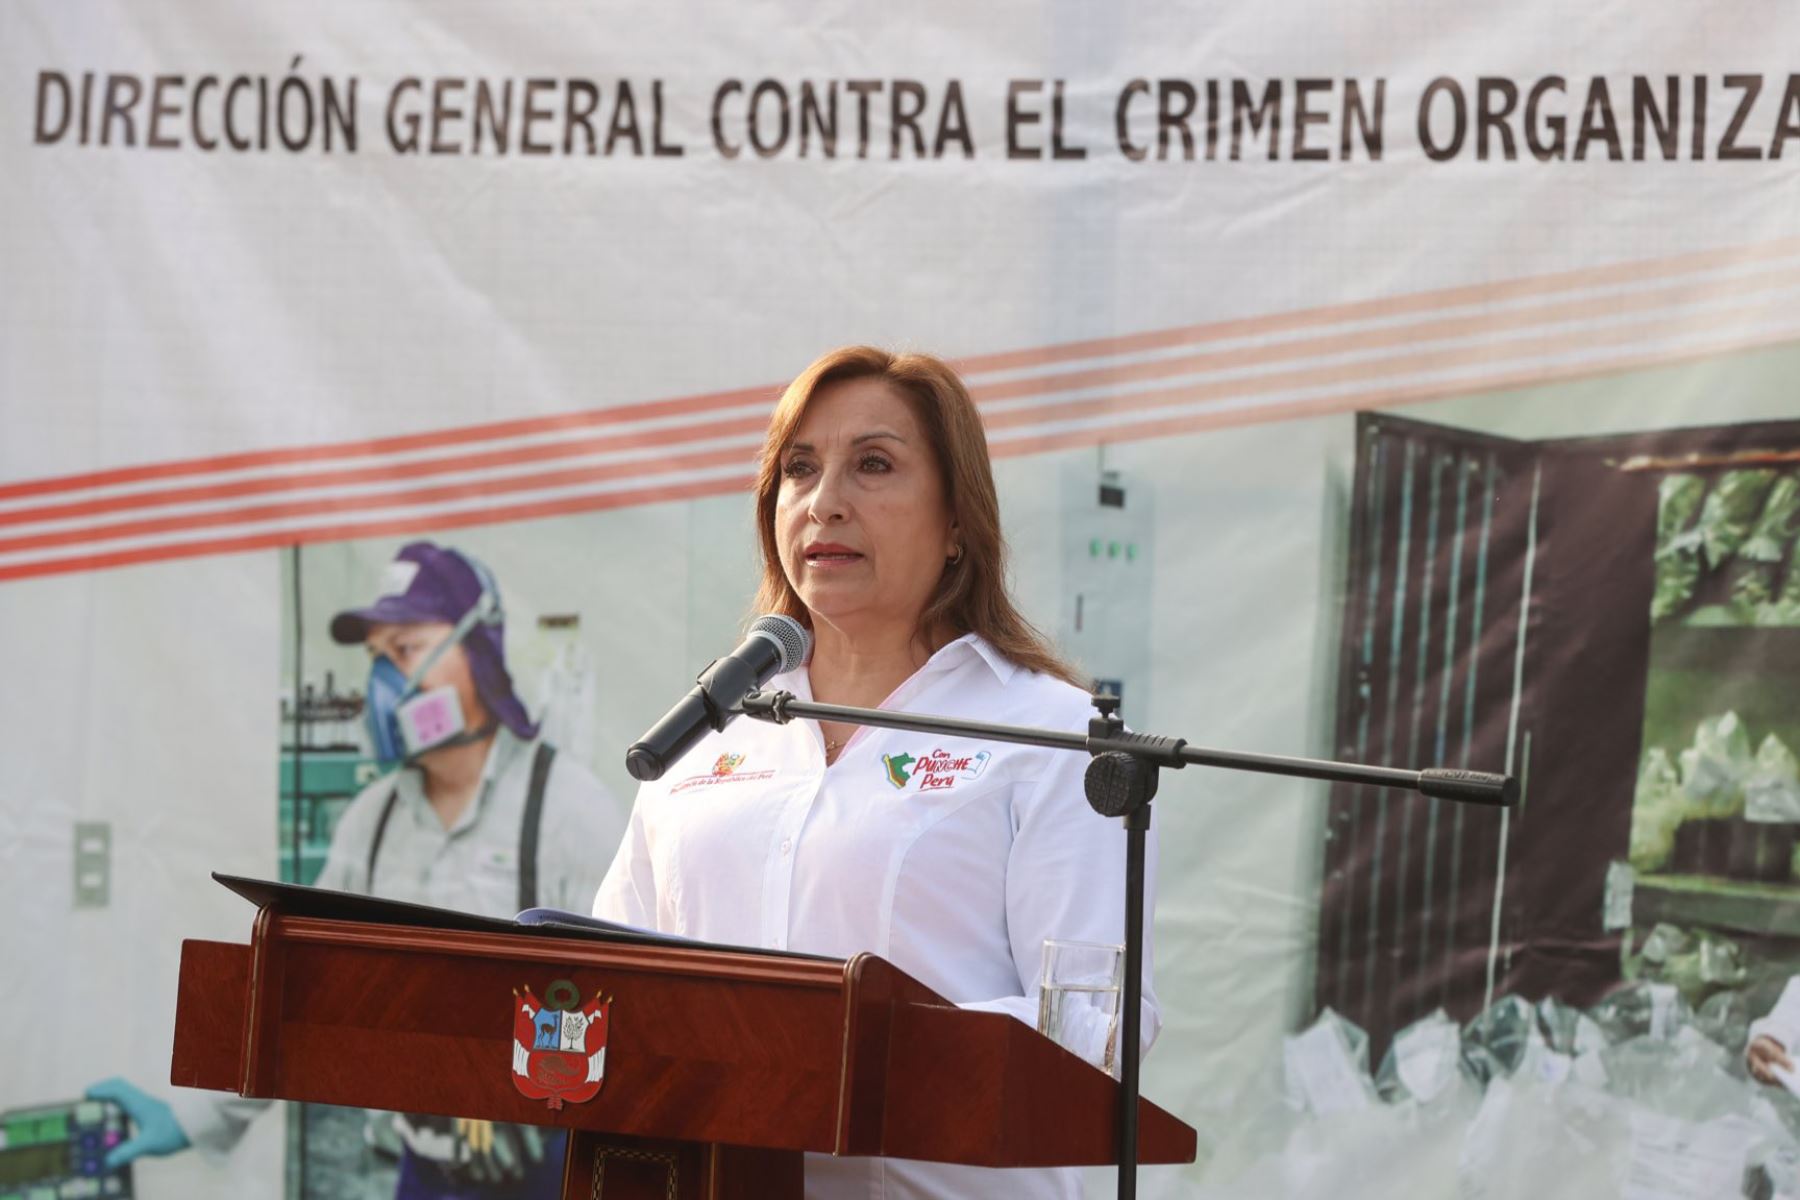 Peru: President reaffirms commitment against drug trafficking and citizen insecurity